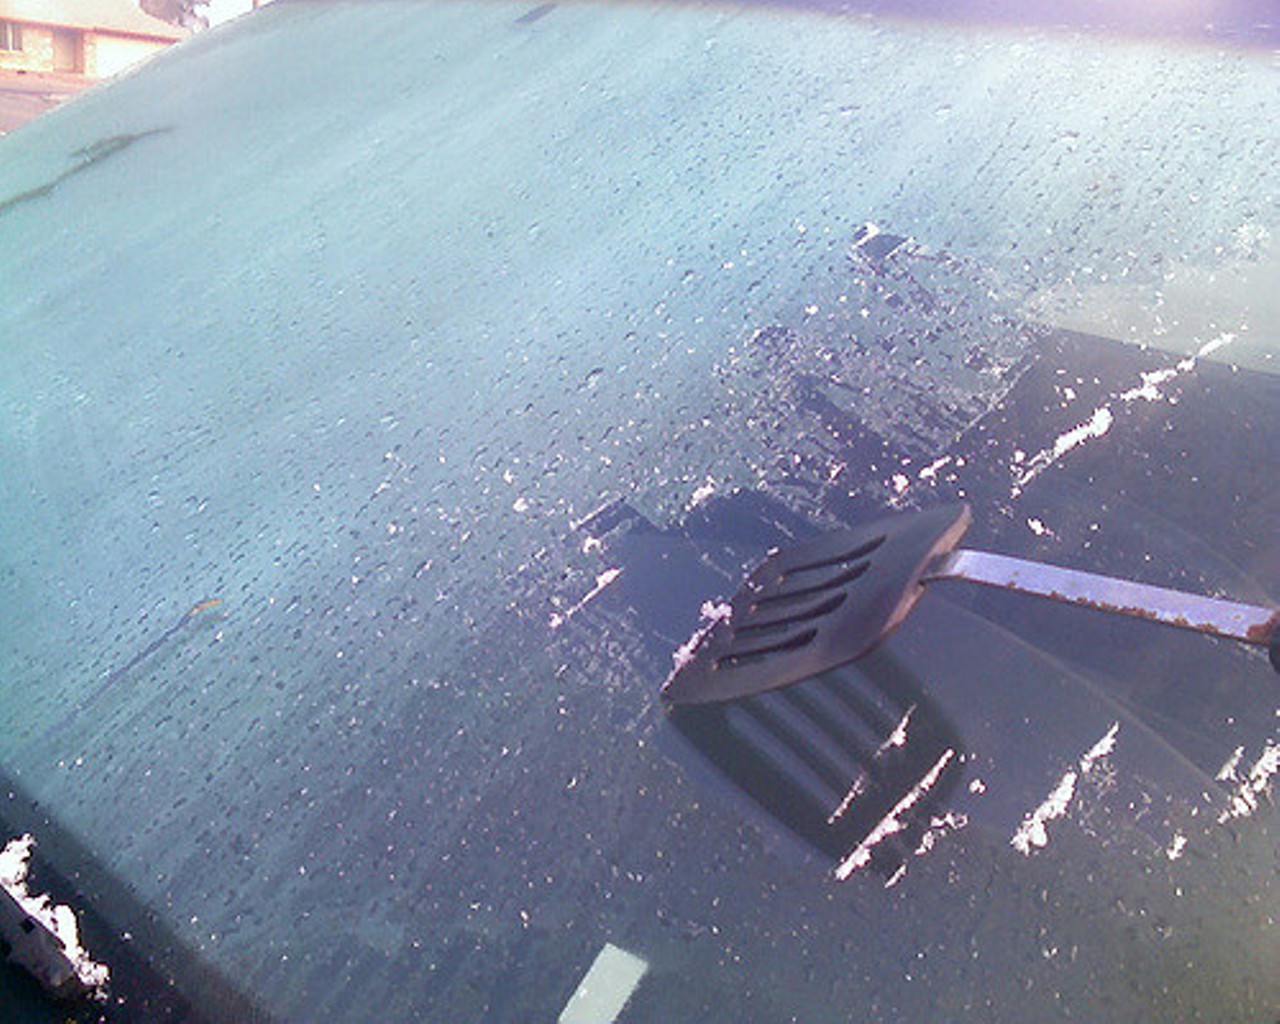  Scraping your windshield with anything you can find  
Anything can become an ice scraper if you try hard enough. CD, credit card, spatula &#151; whatever! 
Photo via  Flickr, user Robeeena 